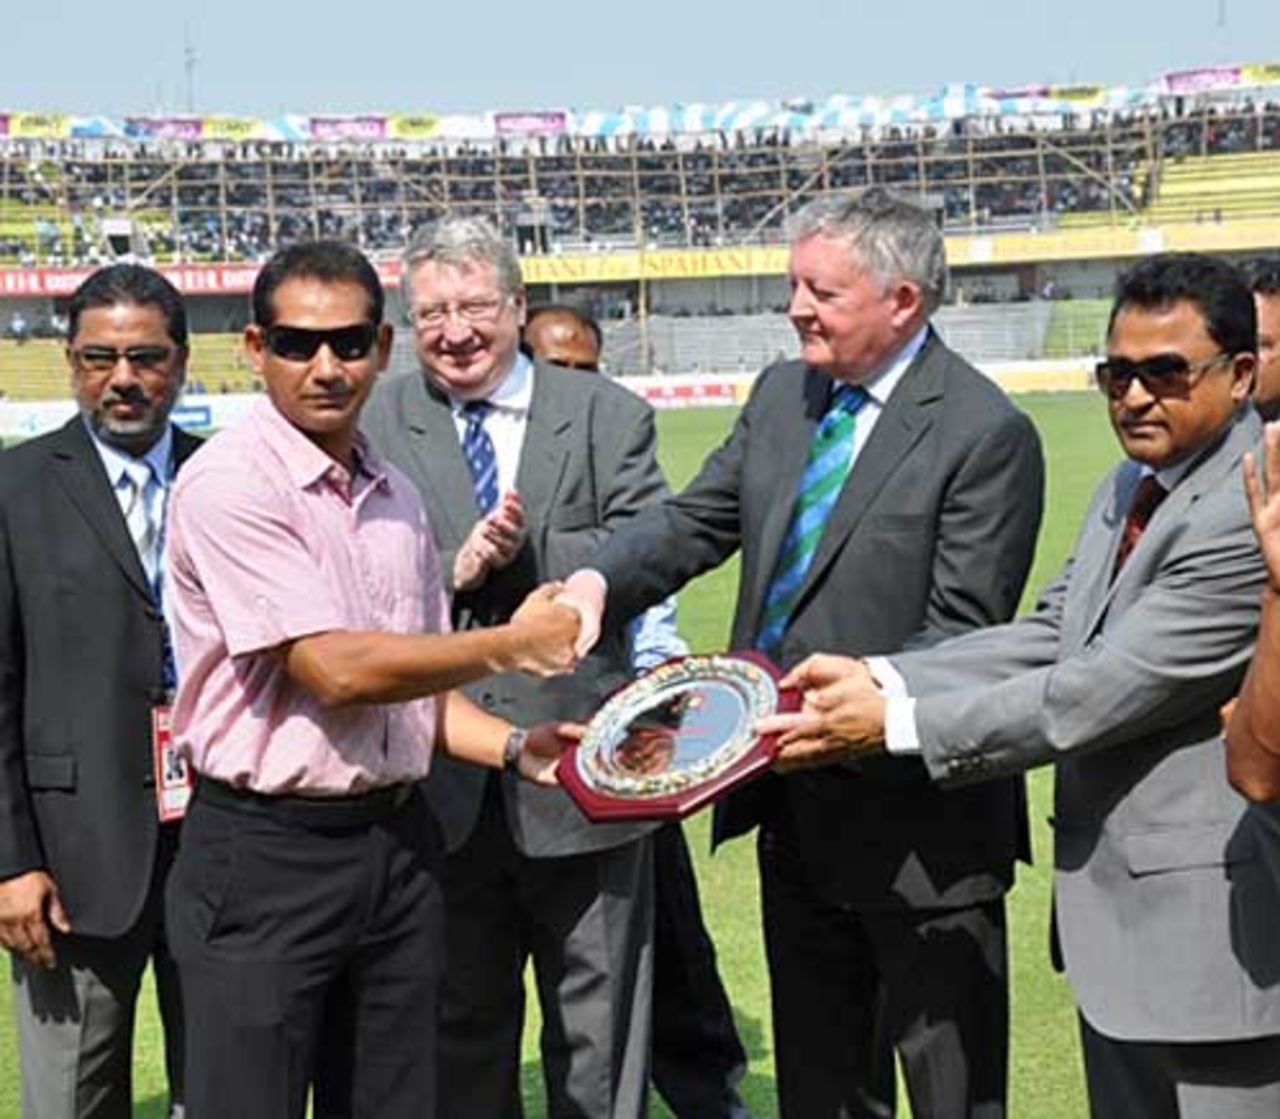 Habibul Bashar, the former Bangladesh captain, receives a memento from ICC president David Morgan after announcing his retirement, Dhaka, March 23, 2010